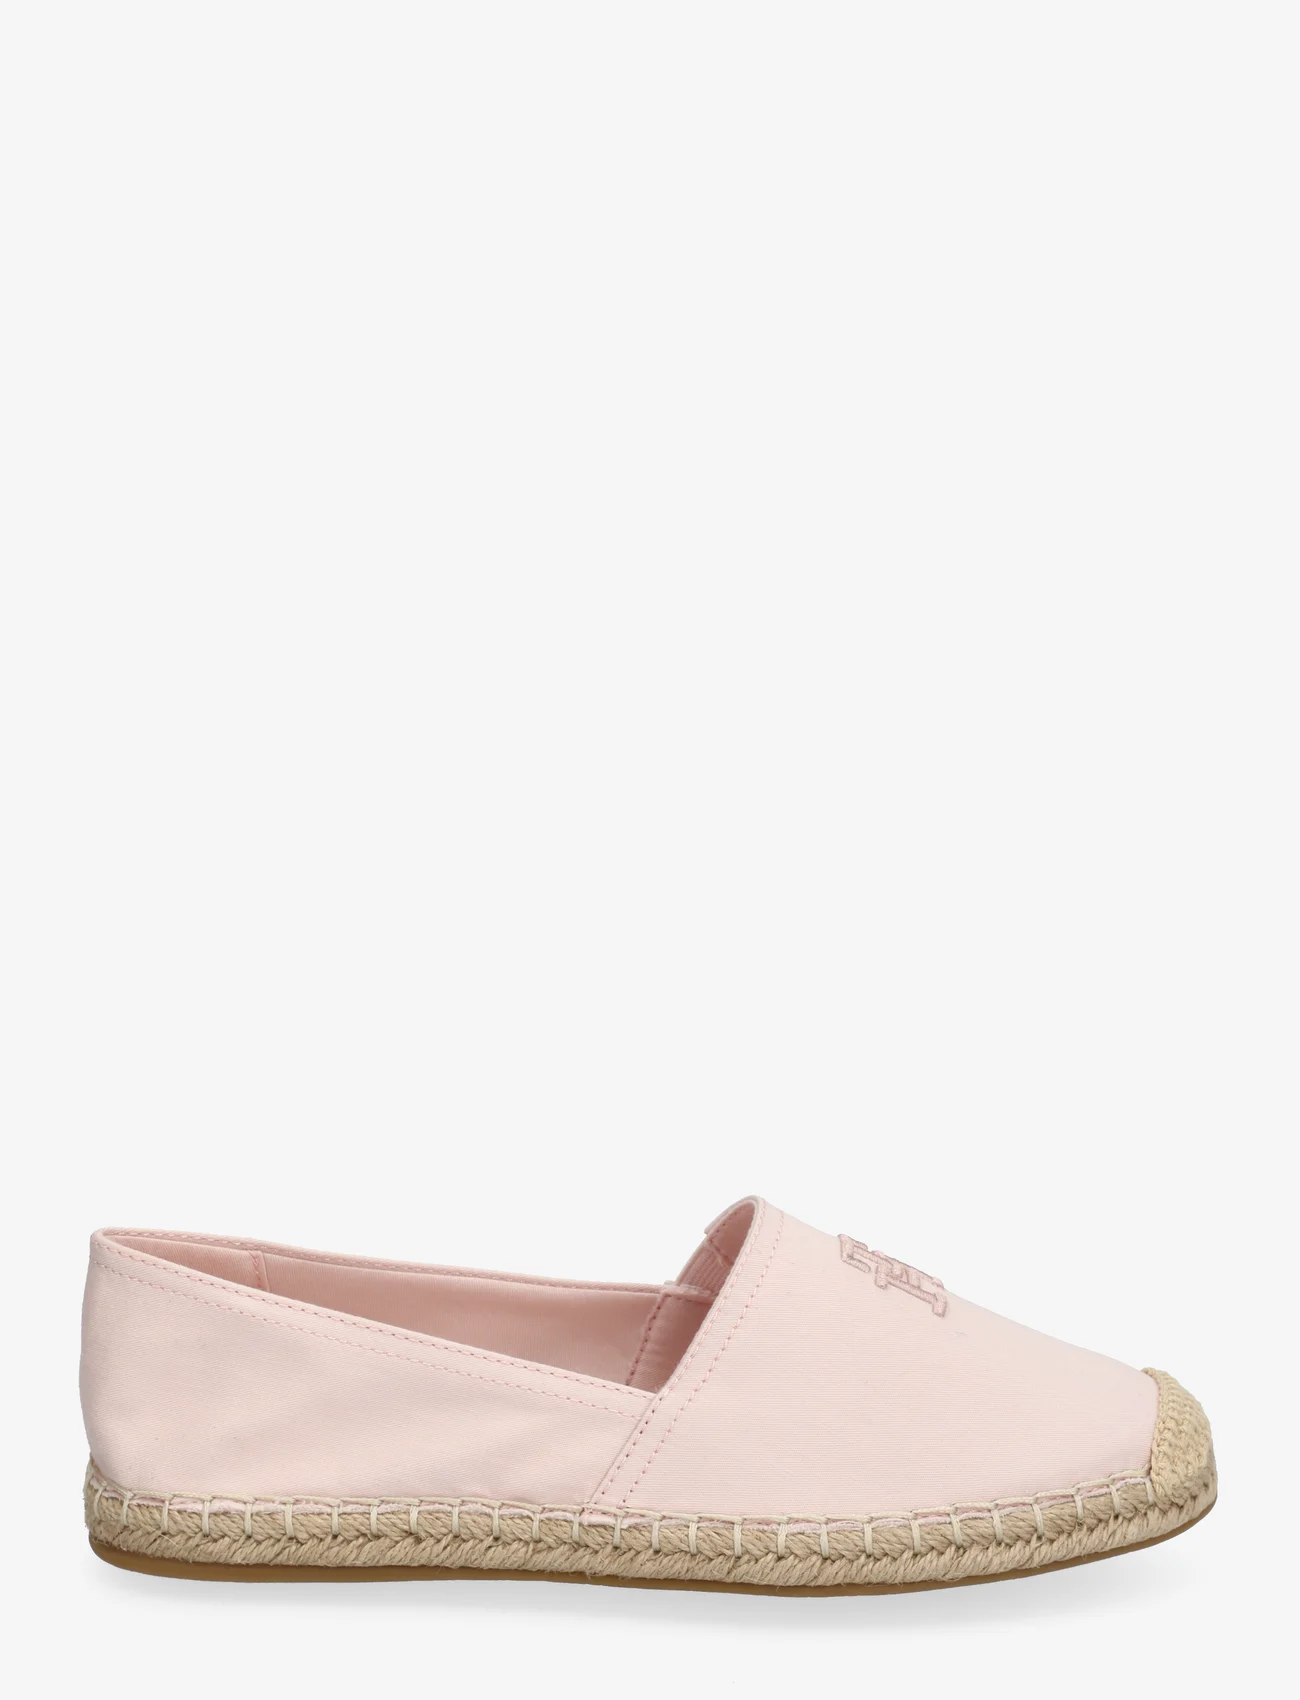 Tommy Hilfiger - EMBROIDERED FLAT ESPADRILLE - matalat espardillot - whimsy pink - 1